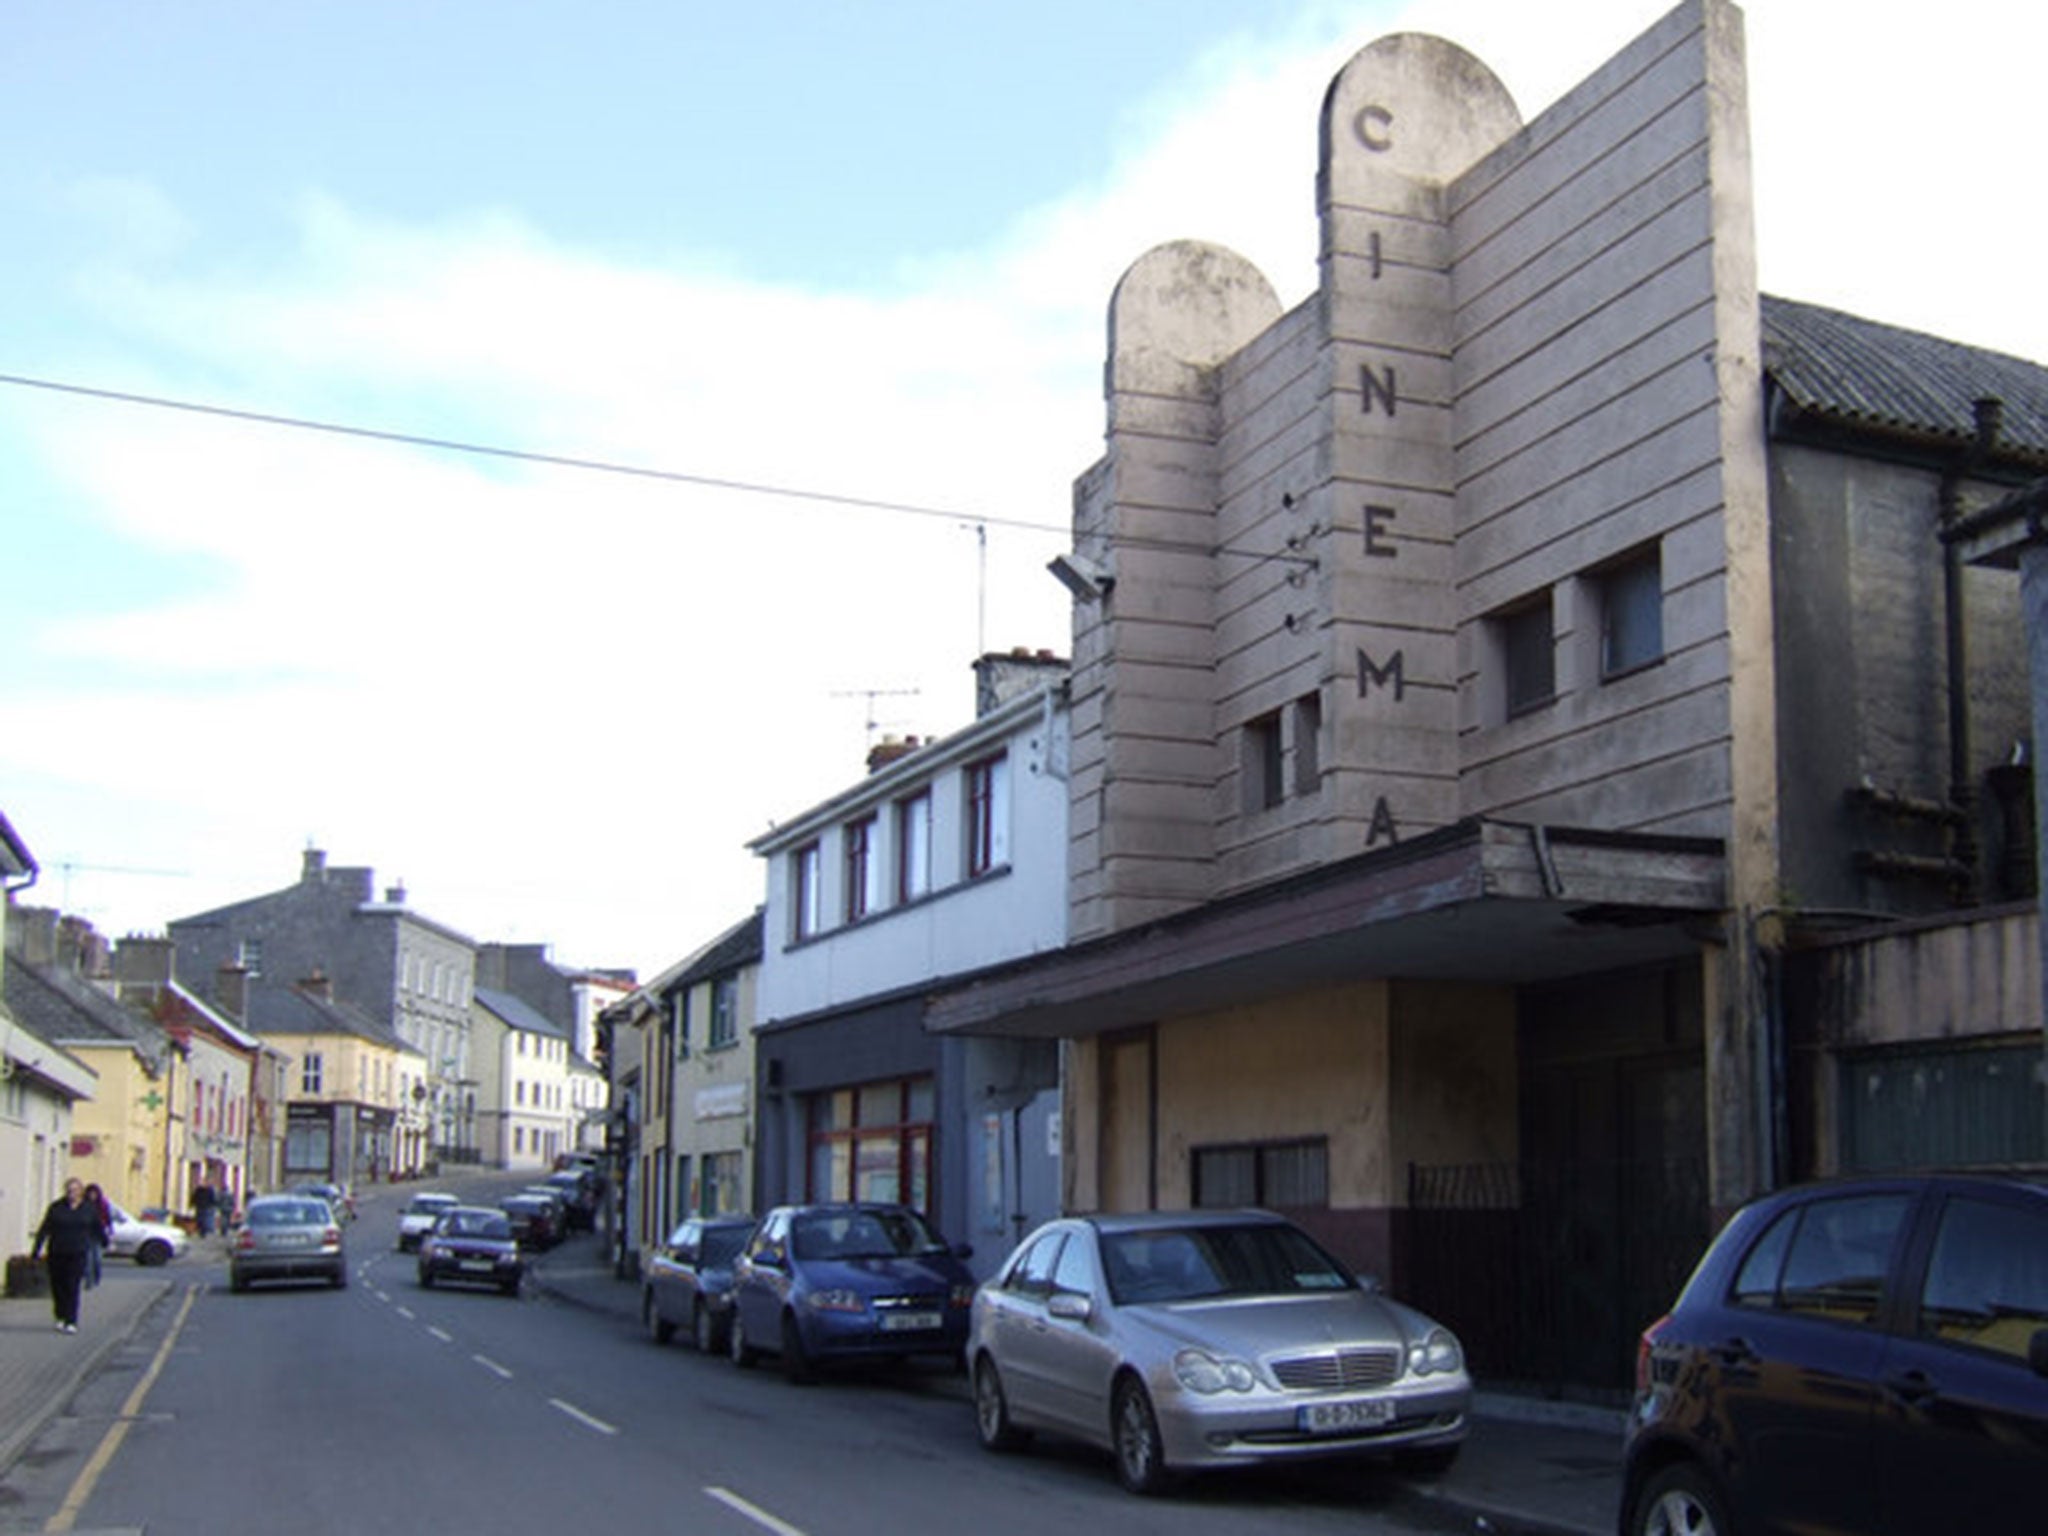 Rathkeale's notoriety is unmatched by its population of 1,500